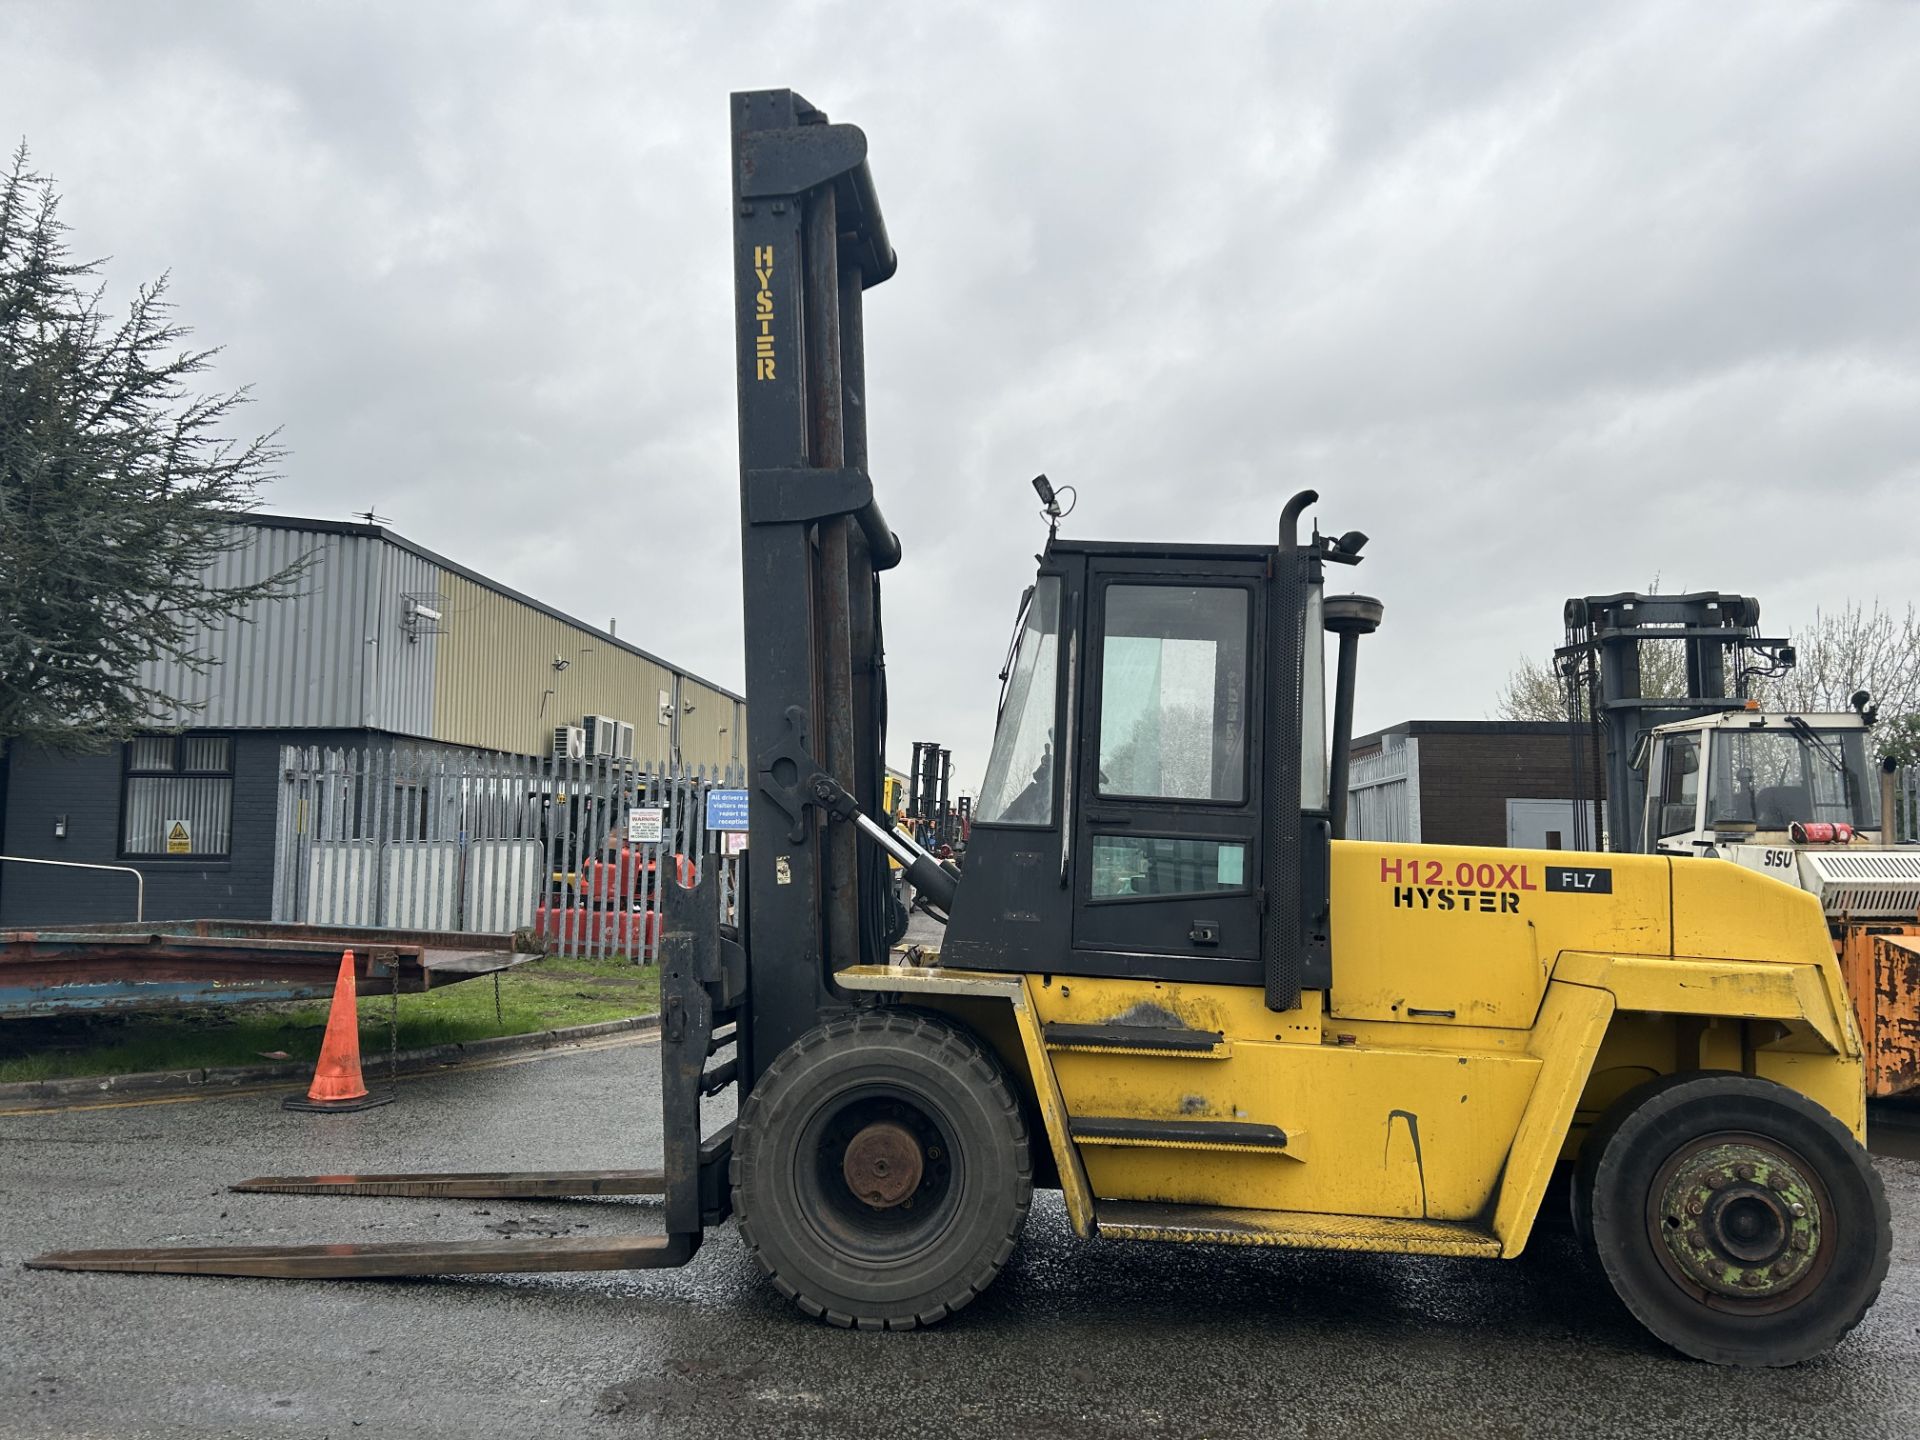 DIESEL FORKLIFTS HYSTER H12.00XL - Image 4 of 4